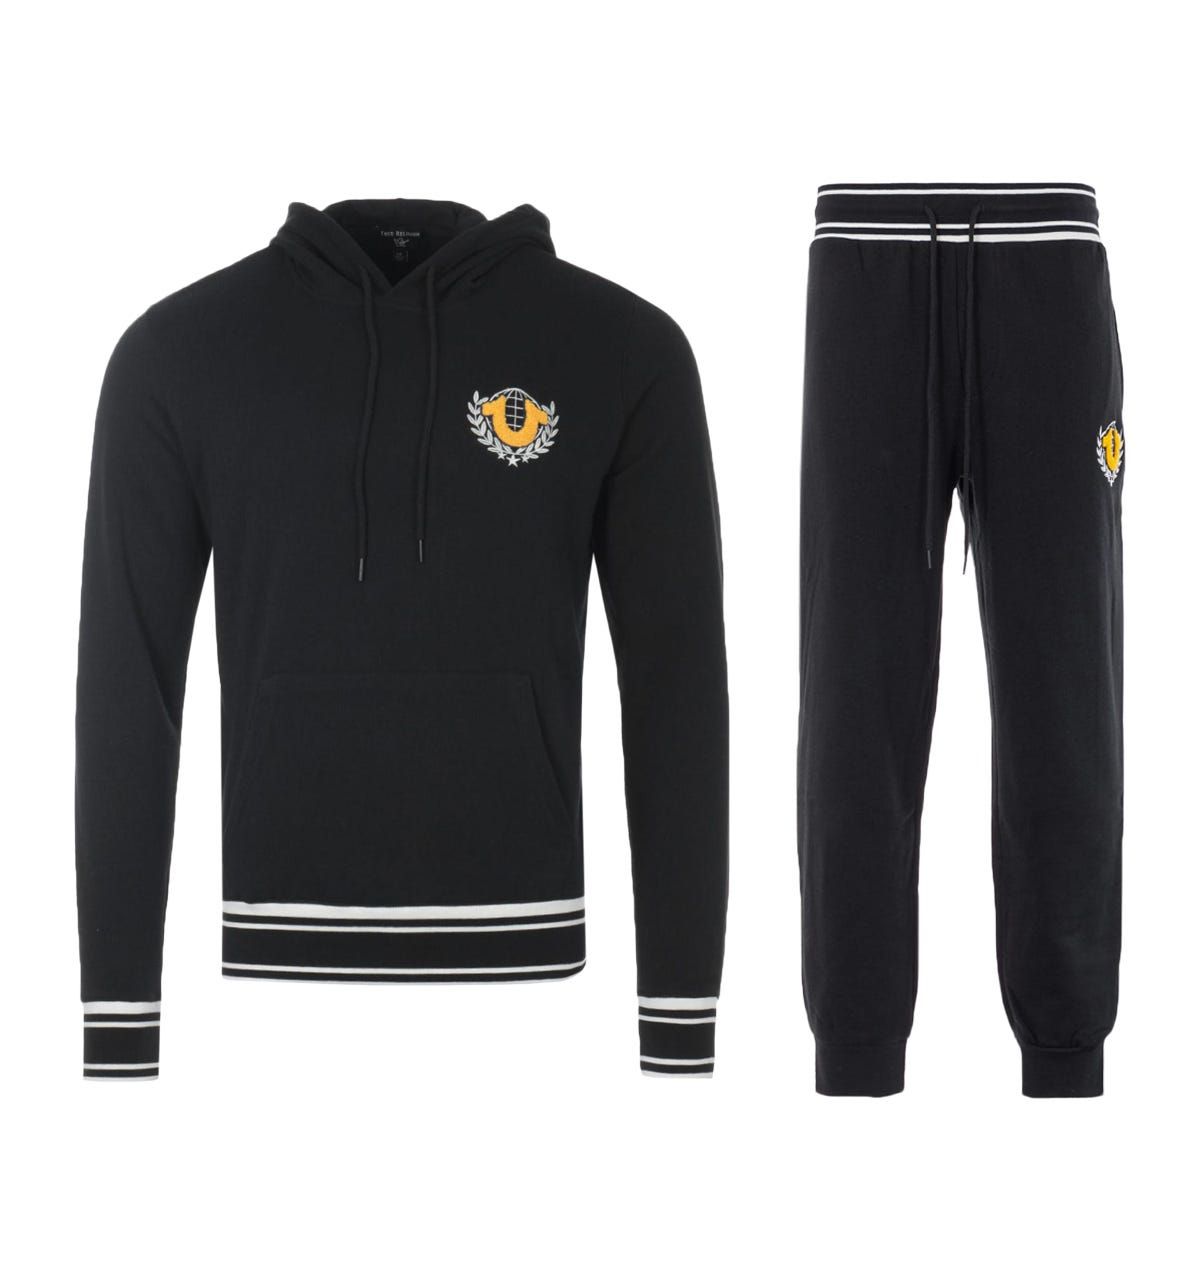 The Collegiate Crest Logo Tracksuit from True Religion boast their bold designs with supreme comfort. Both pieces have been crafted from a soft cotton blend providing comfort and breathability. The joggers are fitted with a drawstring waist and ribbed cuffs, whilst the hoodie is fitted with a drawstring hood, kangaroo pocket and ribbed trims. Both finished with iconic True Religion branding in a chenille effect and contrast stripe detailing.Regular FitCotton Blend CompositionHooded SweatshirtNatural Hand StitchingDrawstring JoggersChenille Effect LogosTrue Religion BrandingStyle & Fit:Regular FitFits True to SizeComposition & Care:60% Cotton40% PolyesterMachine Wash